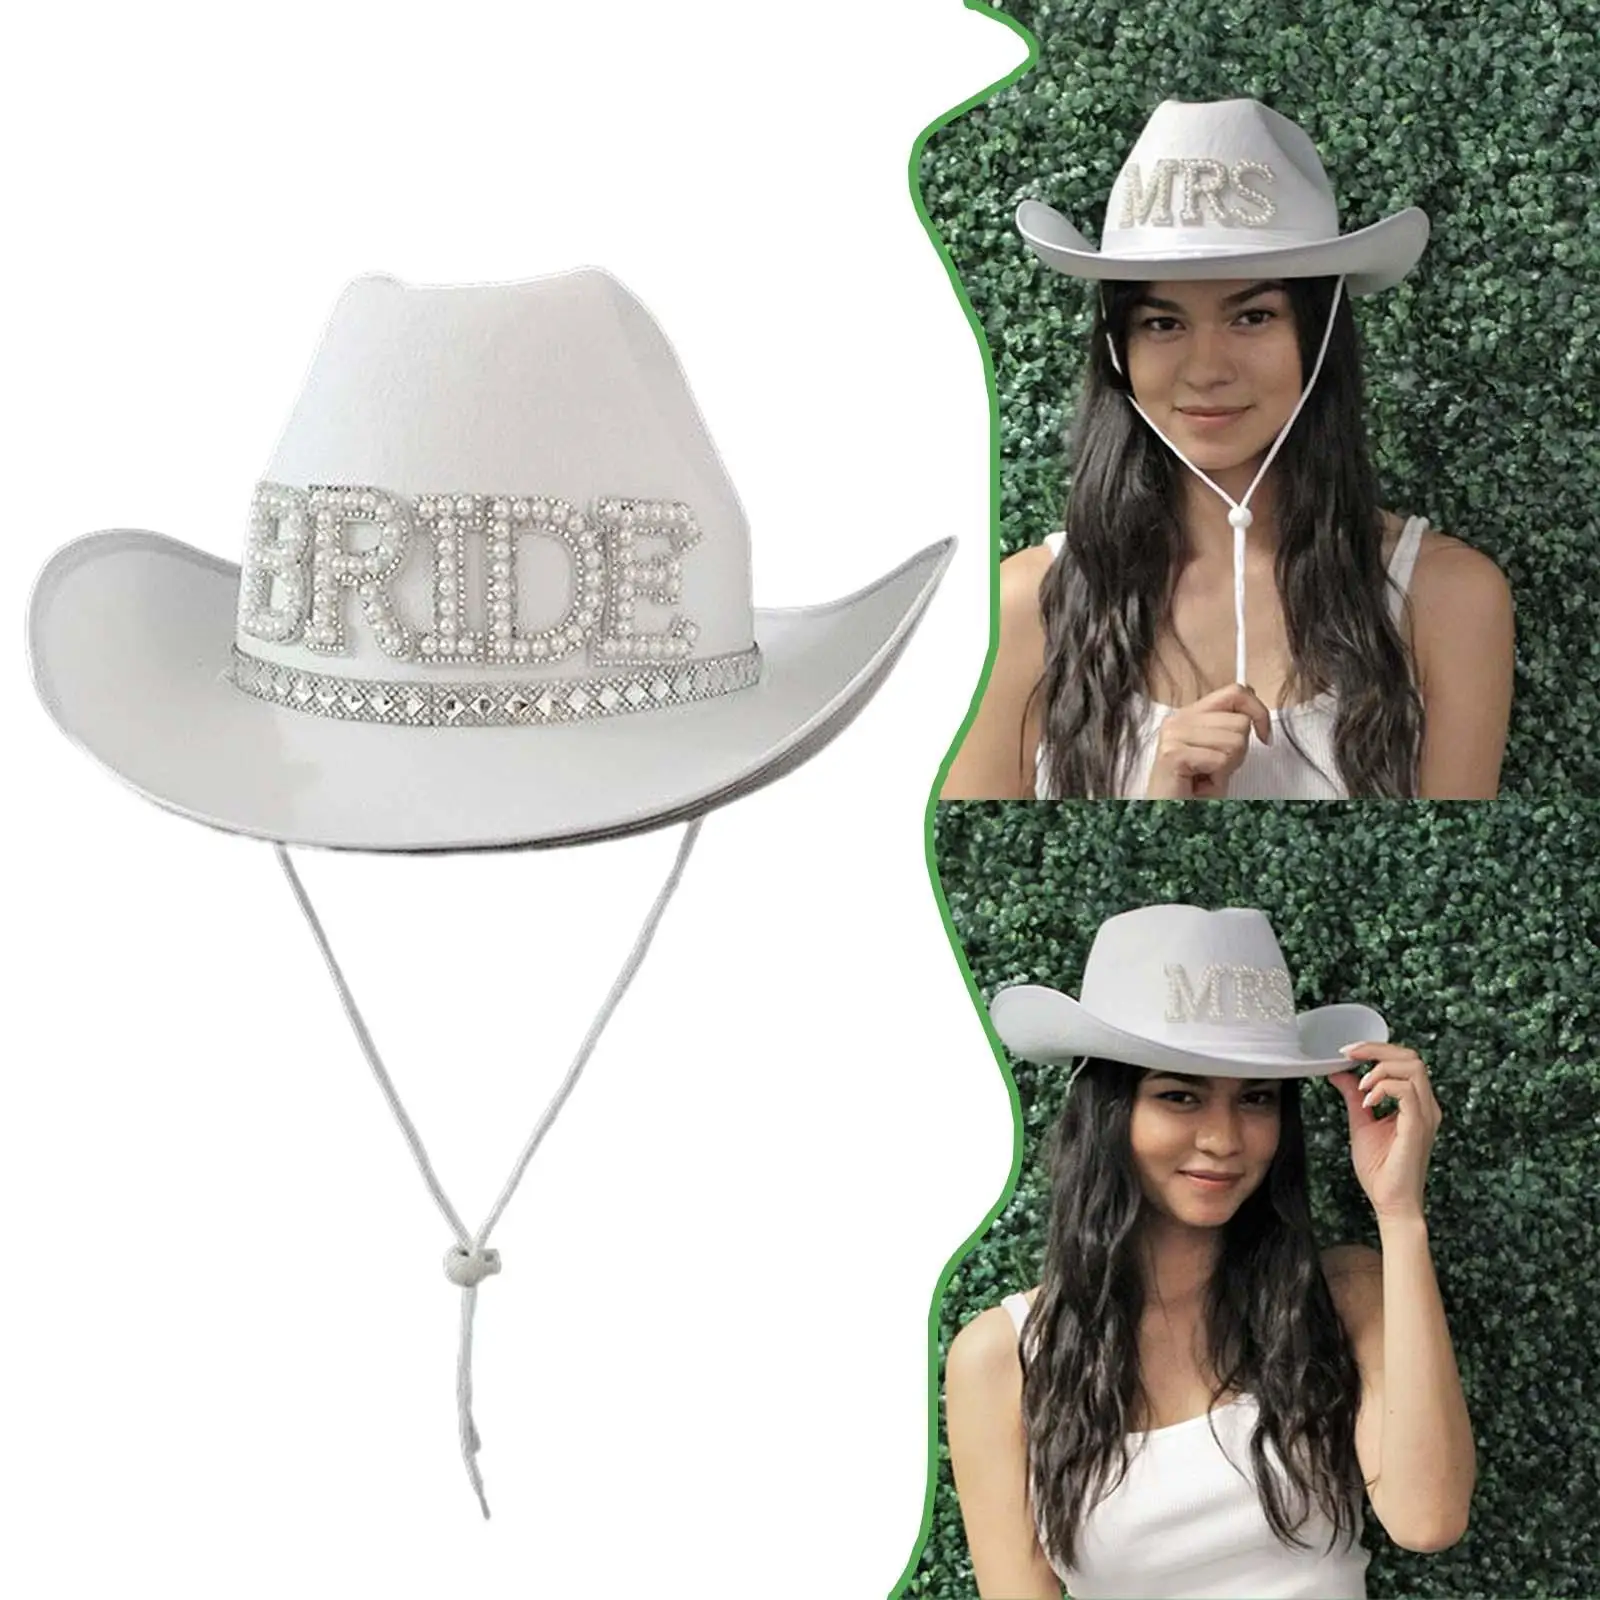 Wild West Women Cowboy Hat Fancy Wide Brim Pearl Beaded Cowgirl Hats for Summer Outdoor Engagement Party Cocktail Decorative